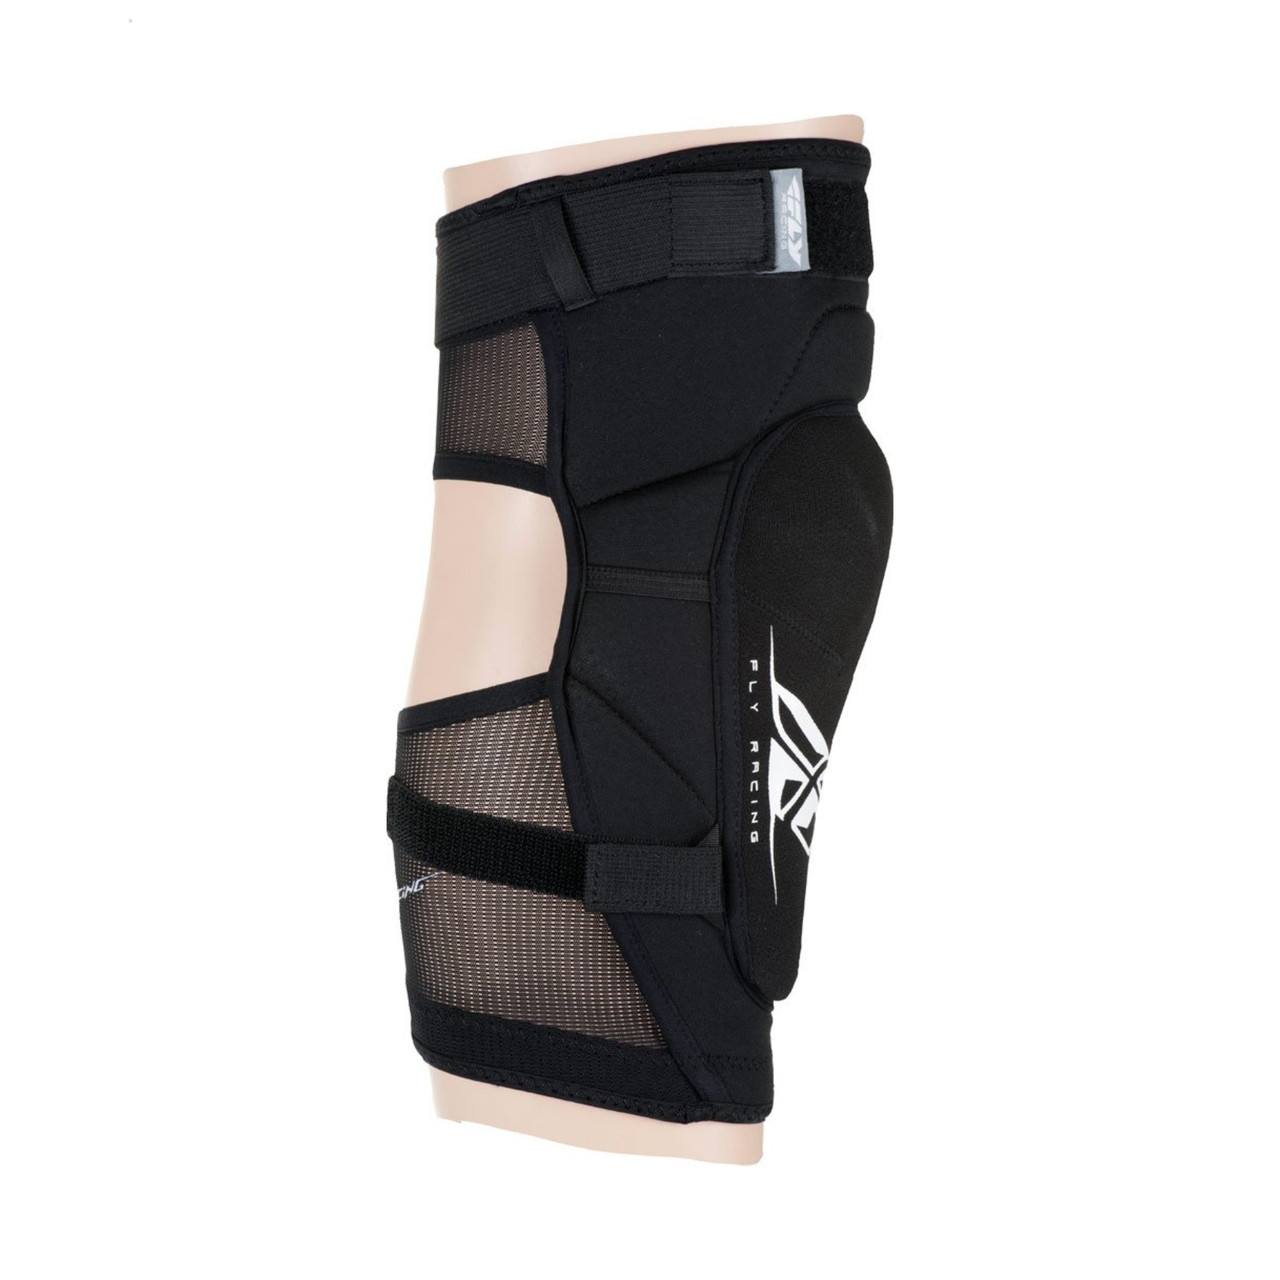 Aftermarket New Cypher Knee Guard XL, 28-3073